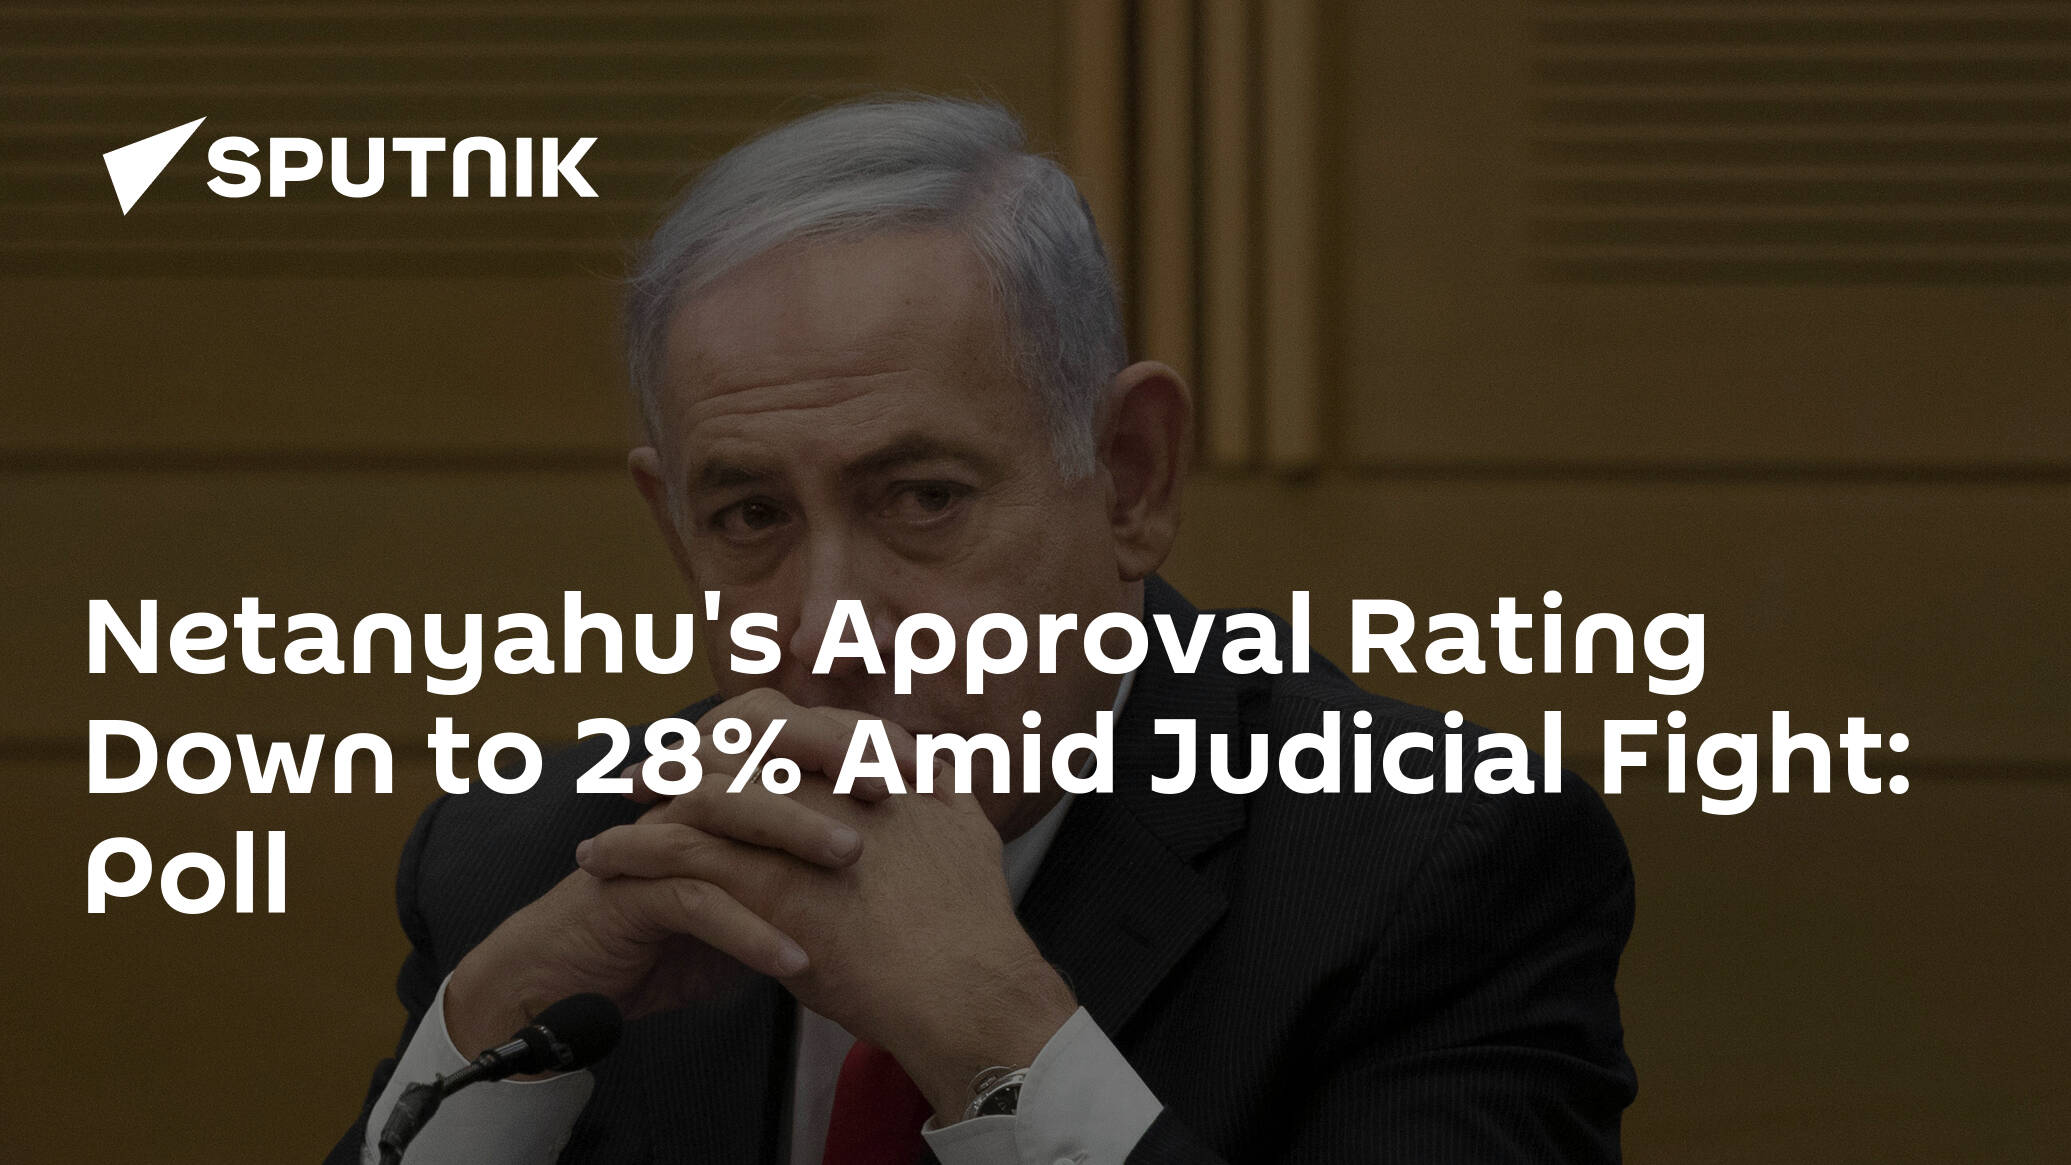 Netanyahu's Approval Rating Down to 28% Amid Judicial Fight: Poll